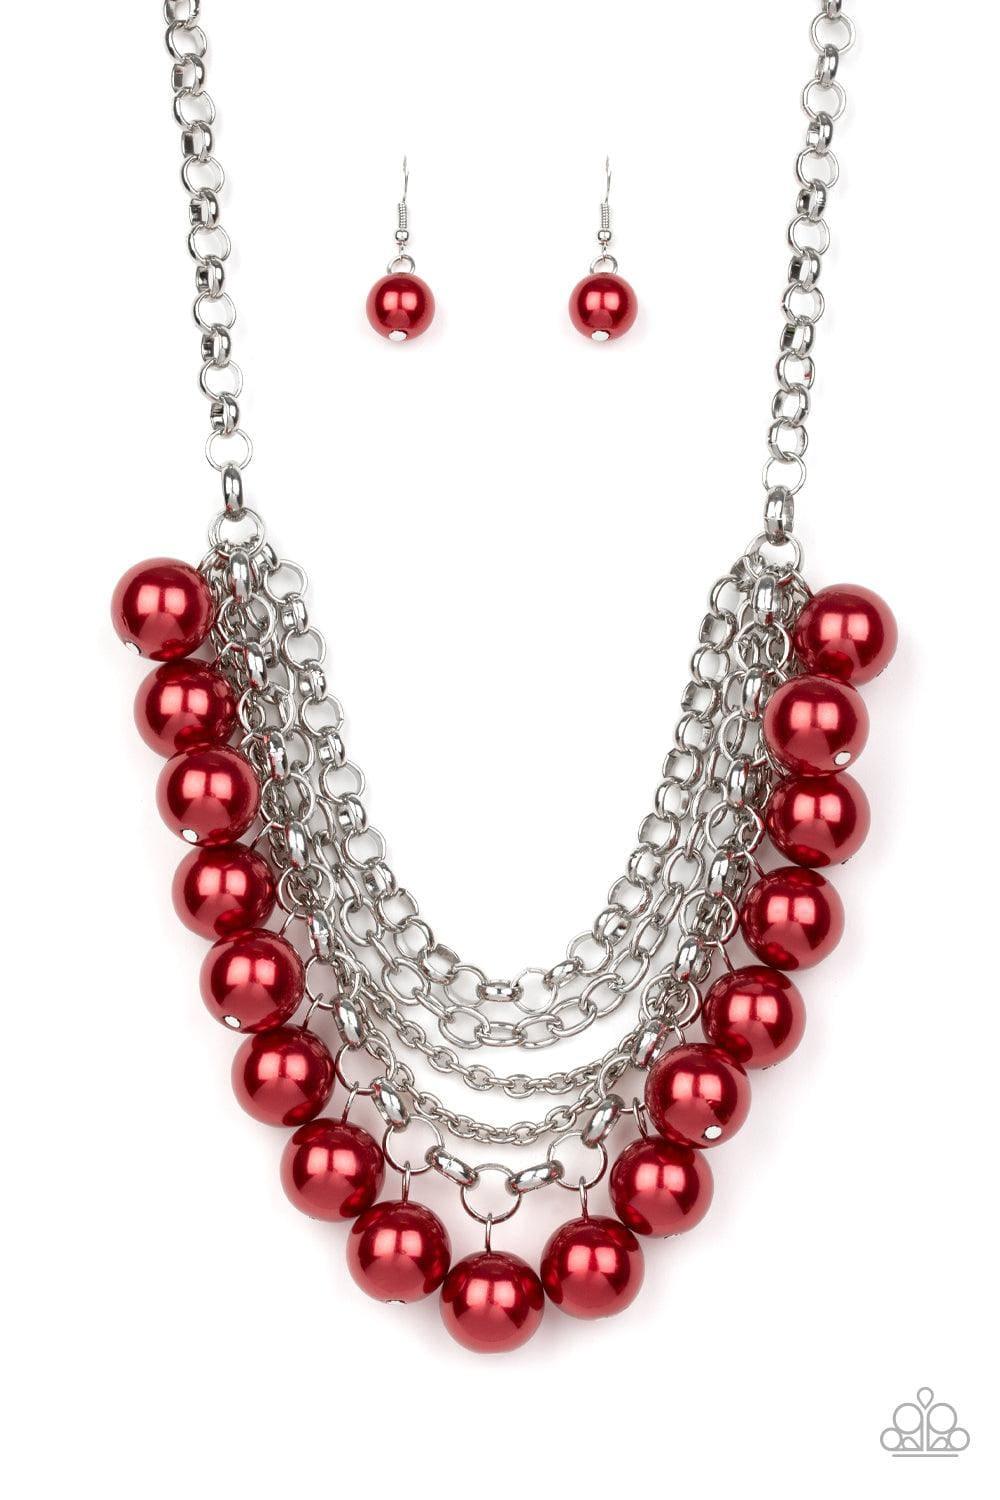 Paparazzi Accessories - One-way Wall Street - Red Necklace - Bling by JessieK